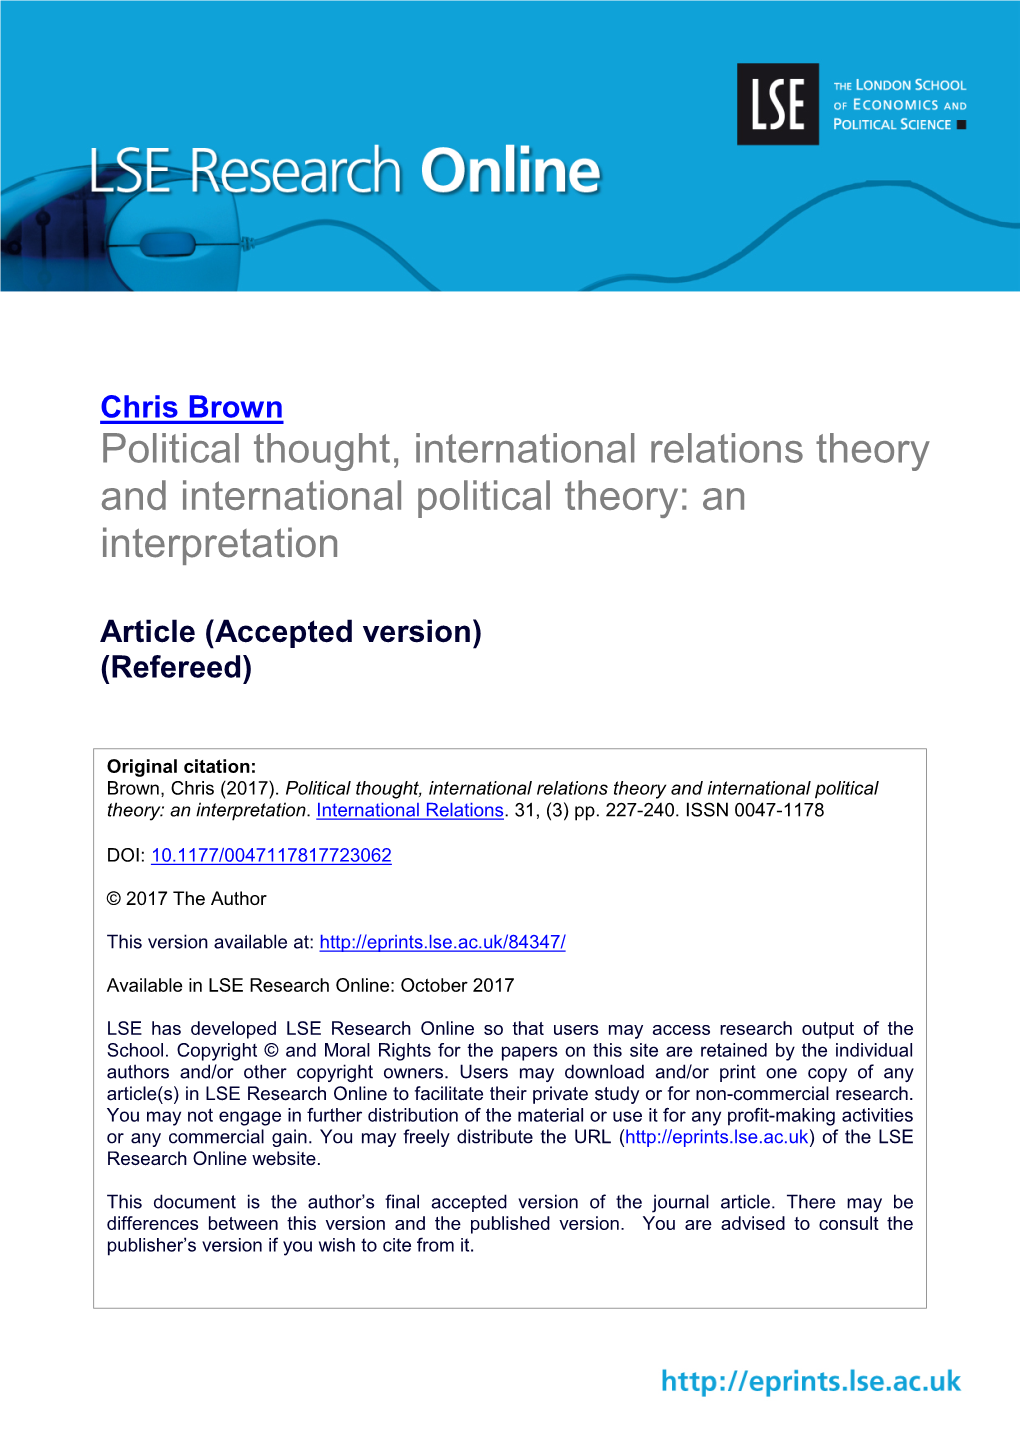 Political Thought, International Relations Theory and International Political Theory: an Interpretation